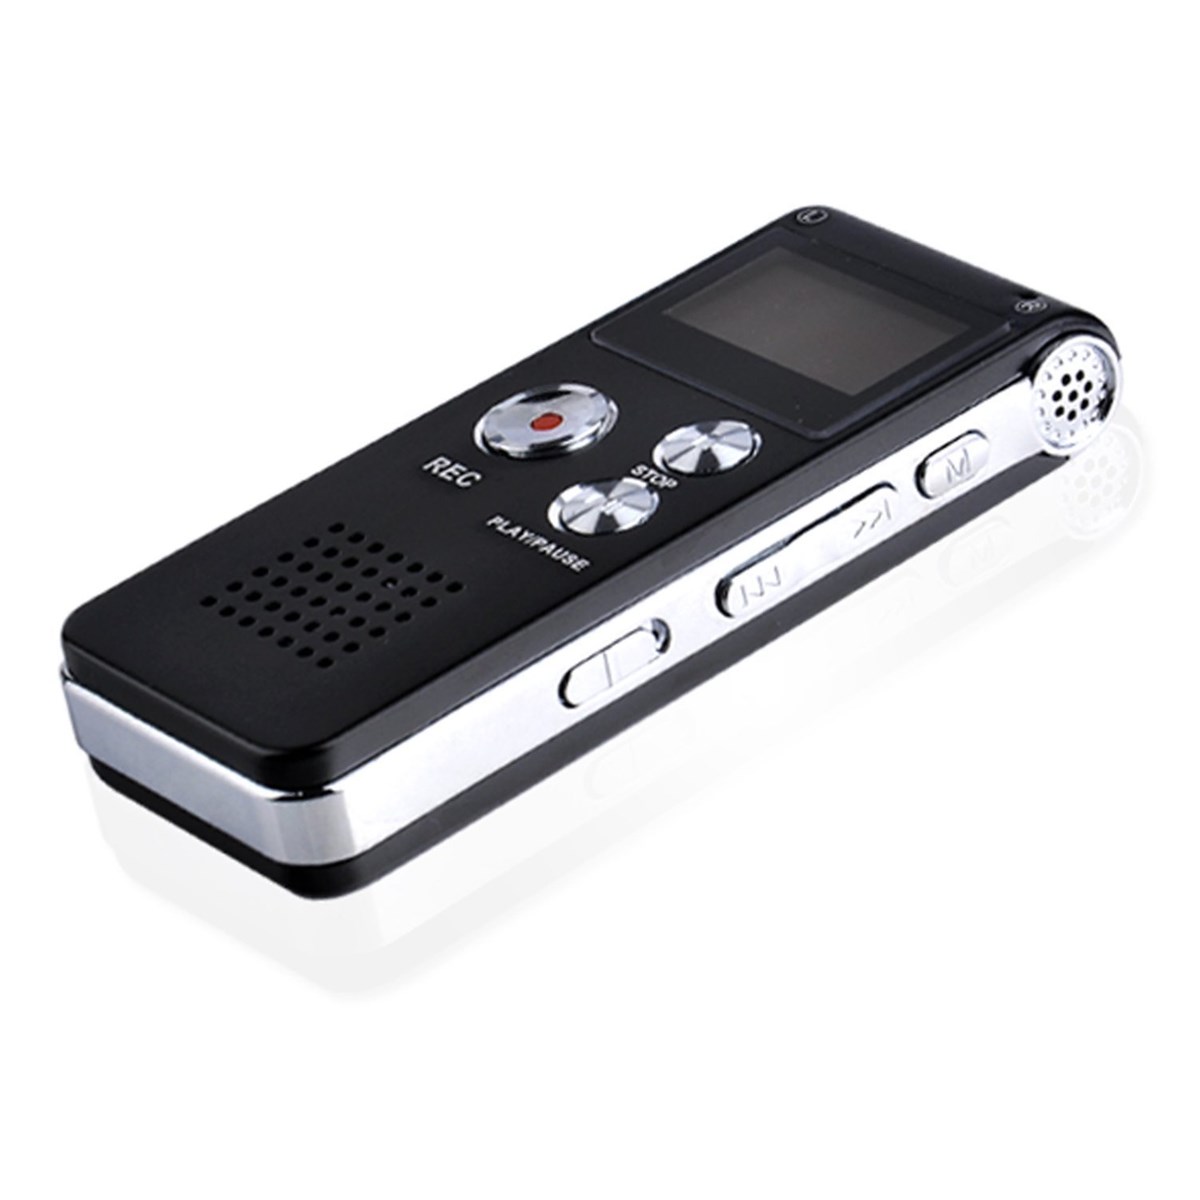 Strong Stability Electronics Equipment MP3 Player Mini Flash Drive Audio Digital Voice Recorder